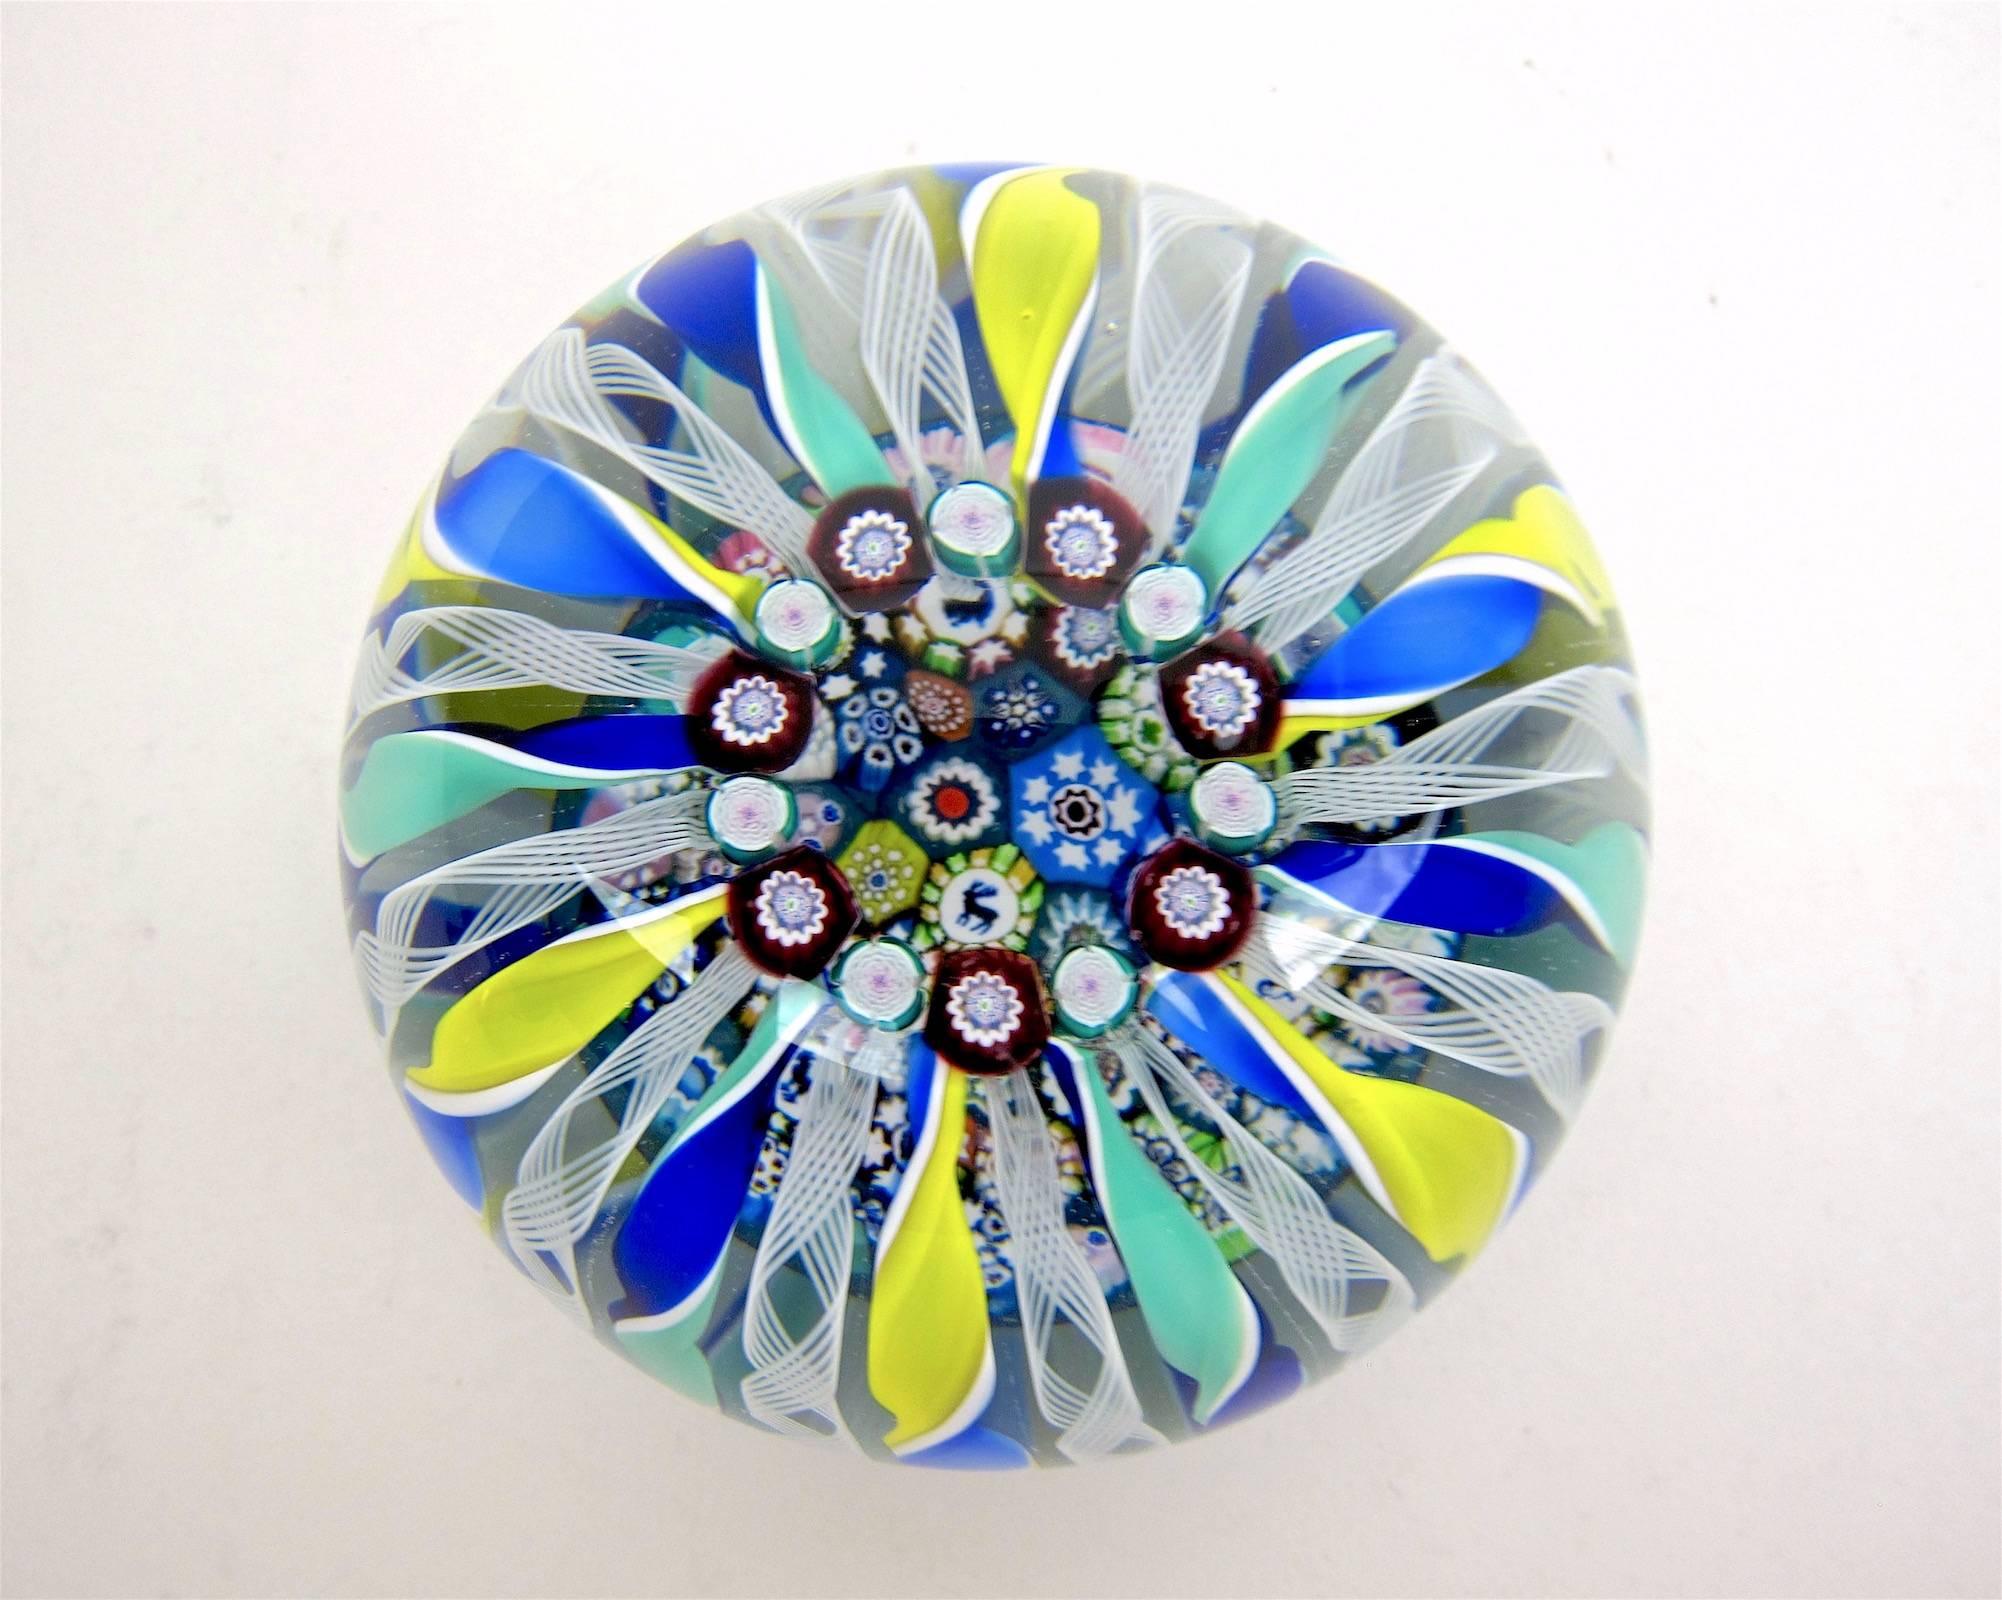 A large and colorful hand crafted studio glass paperweight from John Deacons of Scotland. The design is called a porthole with close packed complex millefiori and four silhouette canes interspersed with Clichy-style roses. Twisted ribbons of blues,